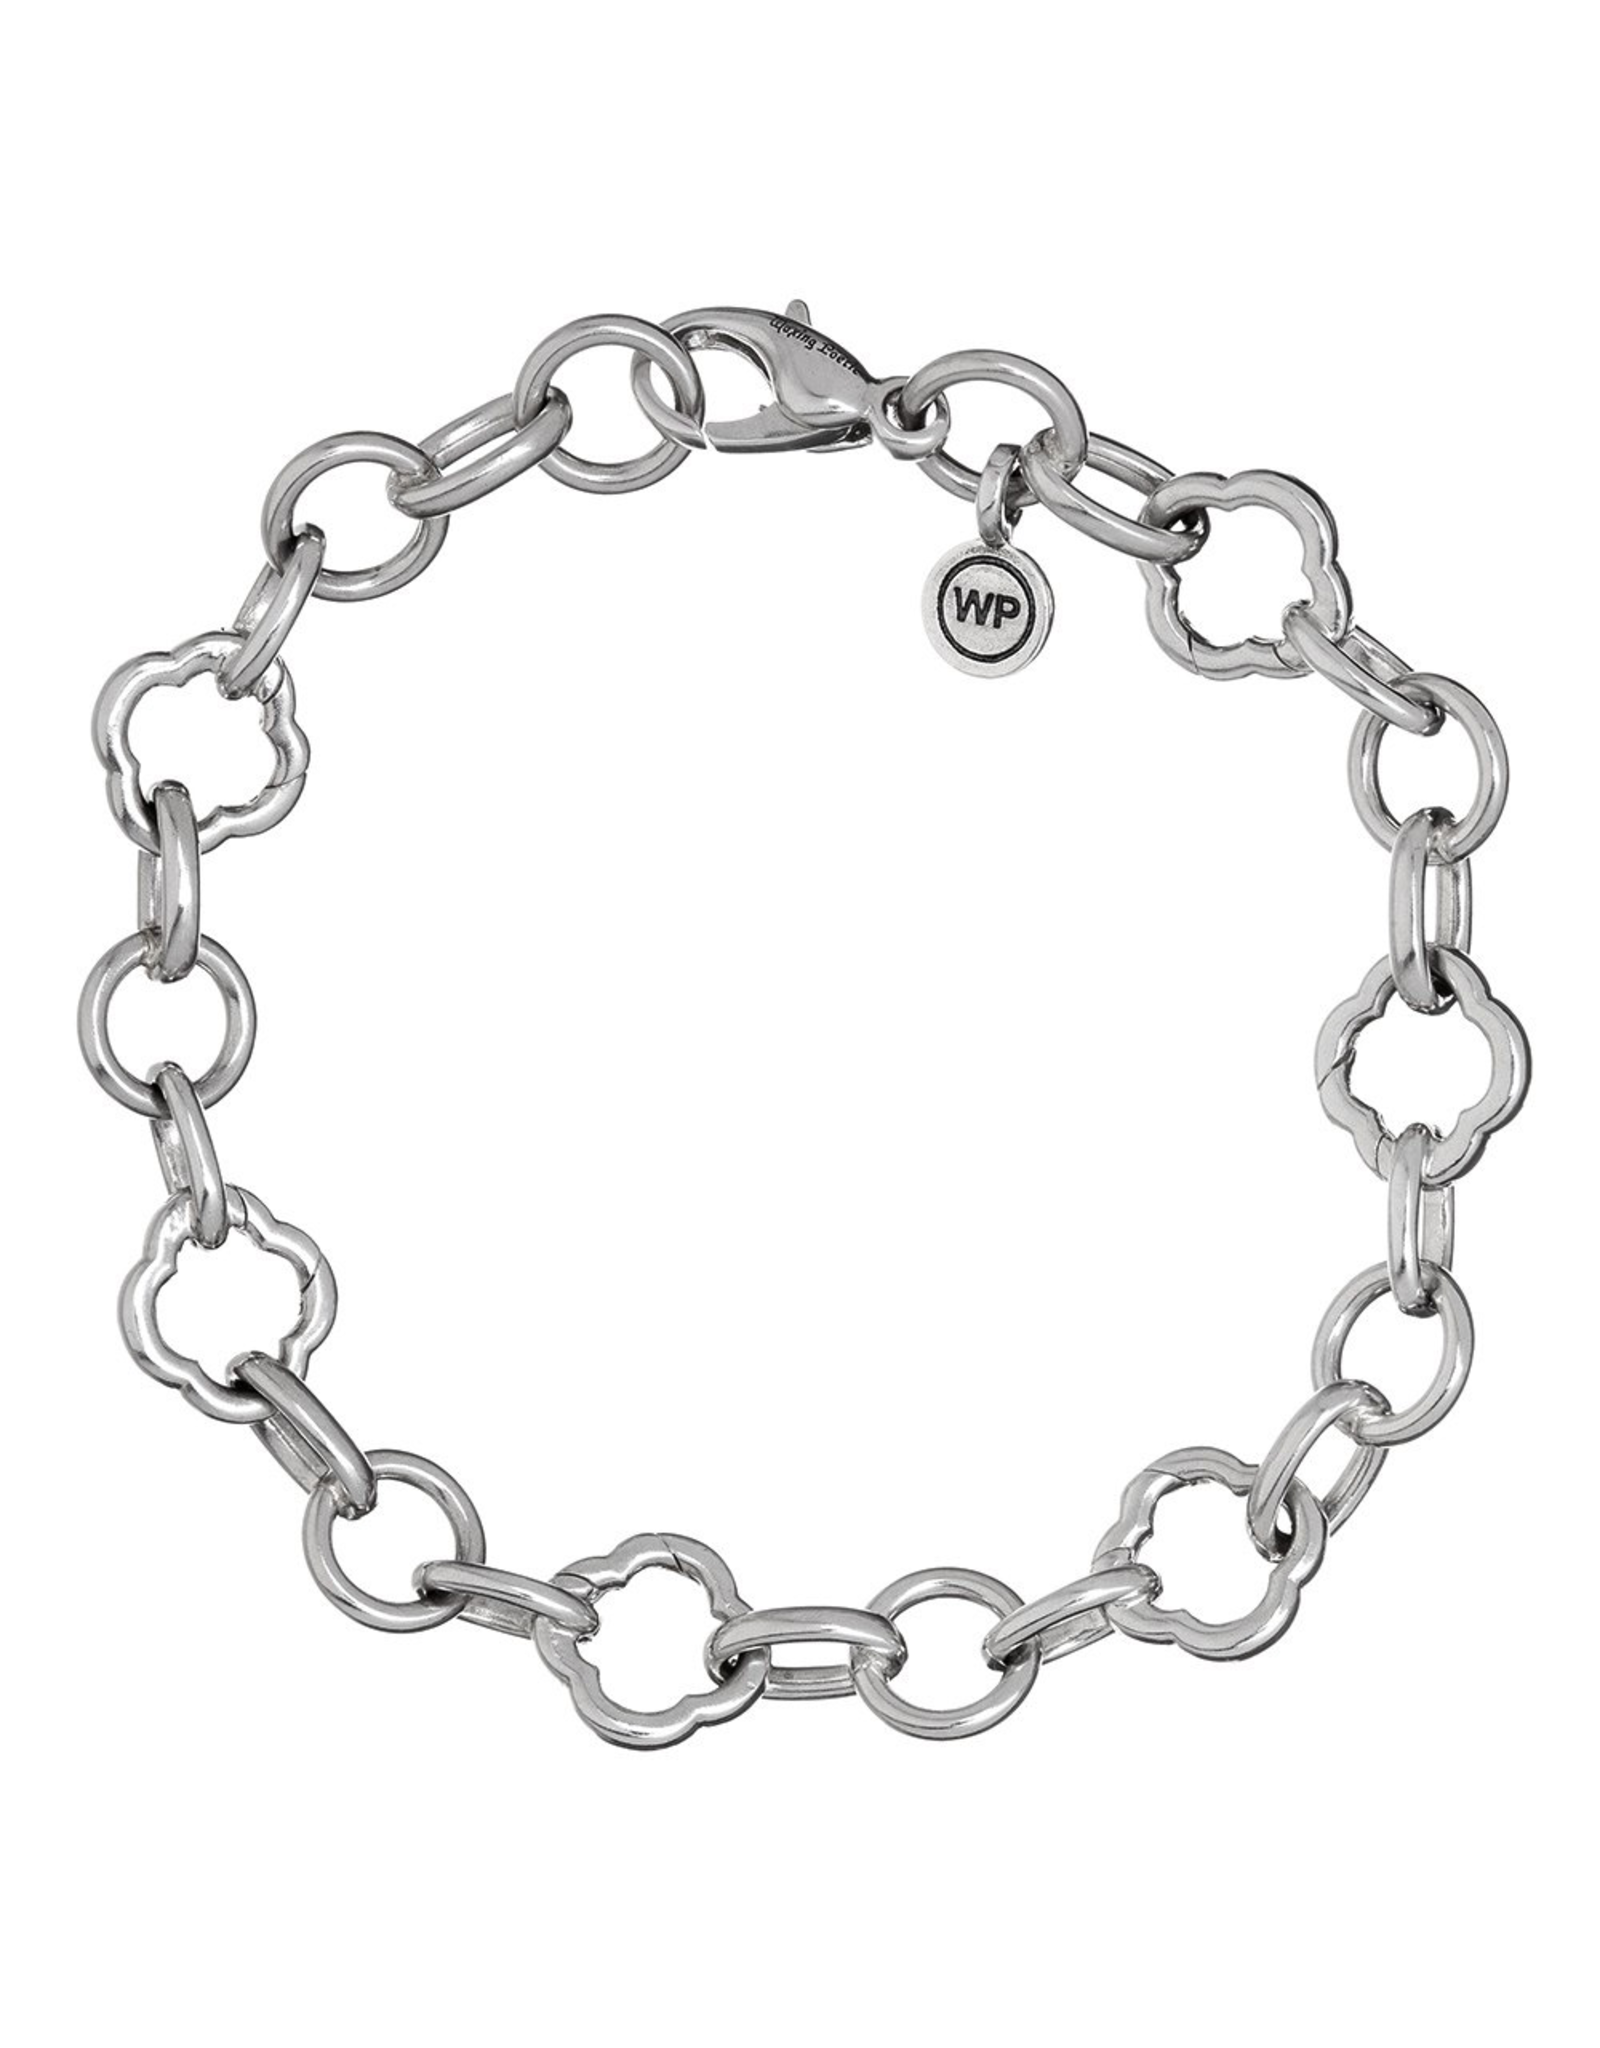 Waxing Poetic® Jewelry Ongoing Ball Bracelet 7.75 inch Sterling Silver